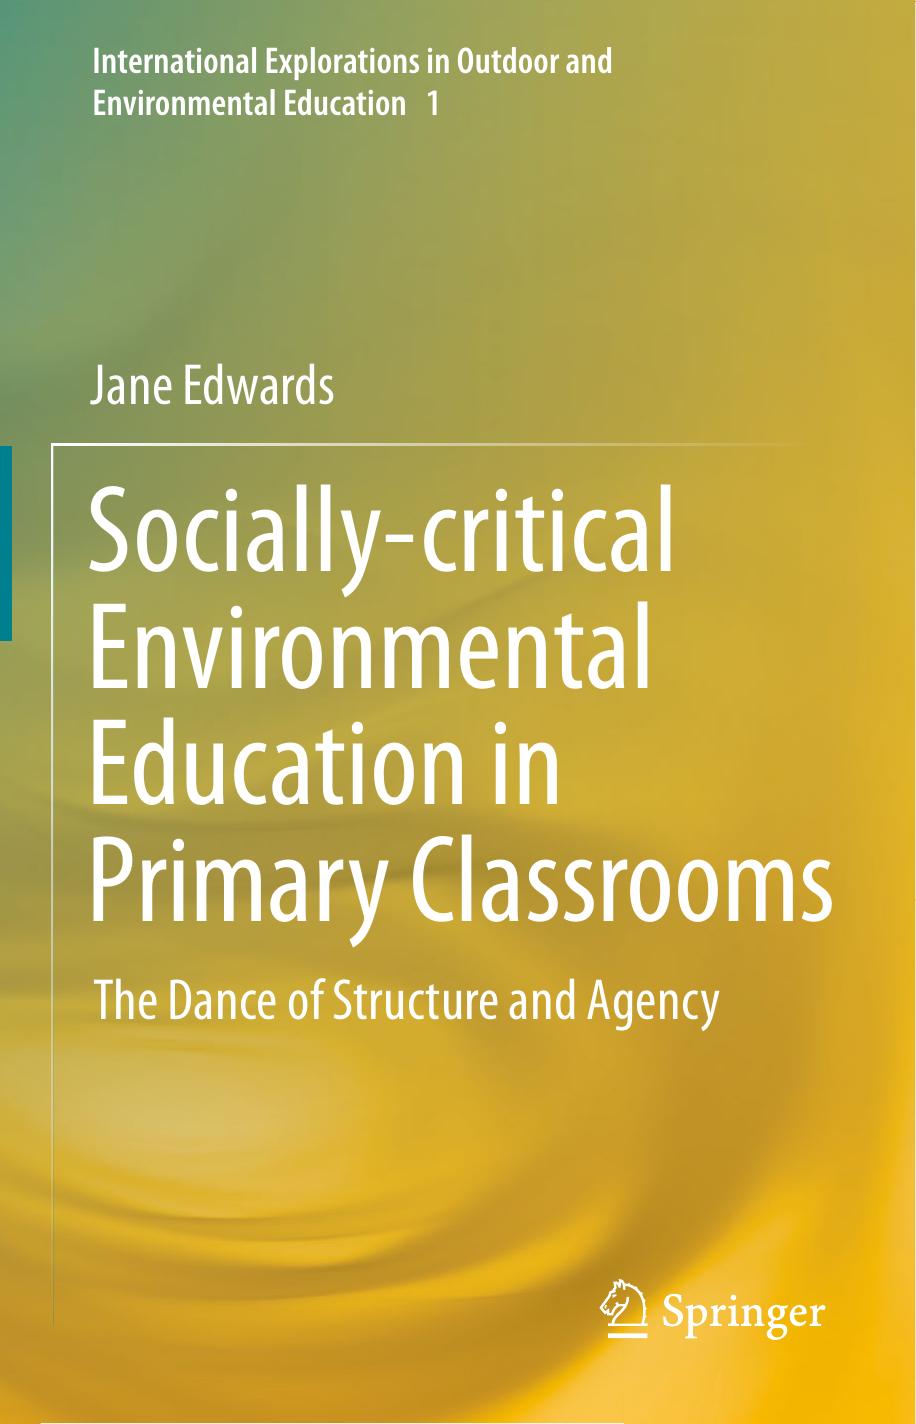 Socially-critical Environmental Education in Primary Classrooms  The Dance of Structure and Agency 2016.pdf